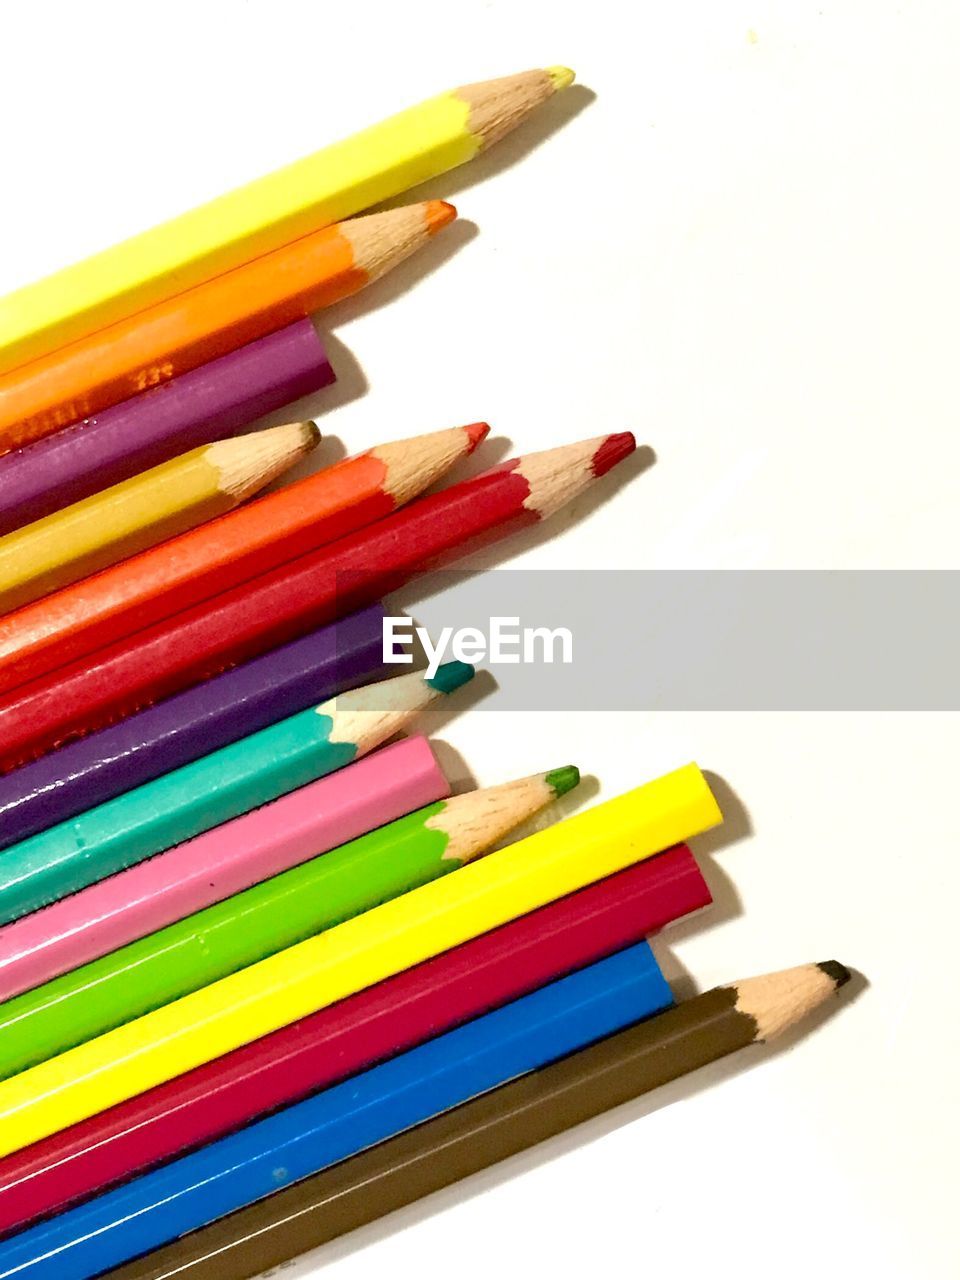 CLOSE-UP OF MULTI COLORED PENCILS AGAINST WHITE BACKGROUND